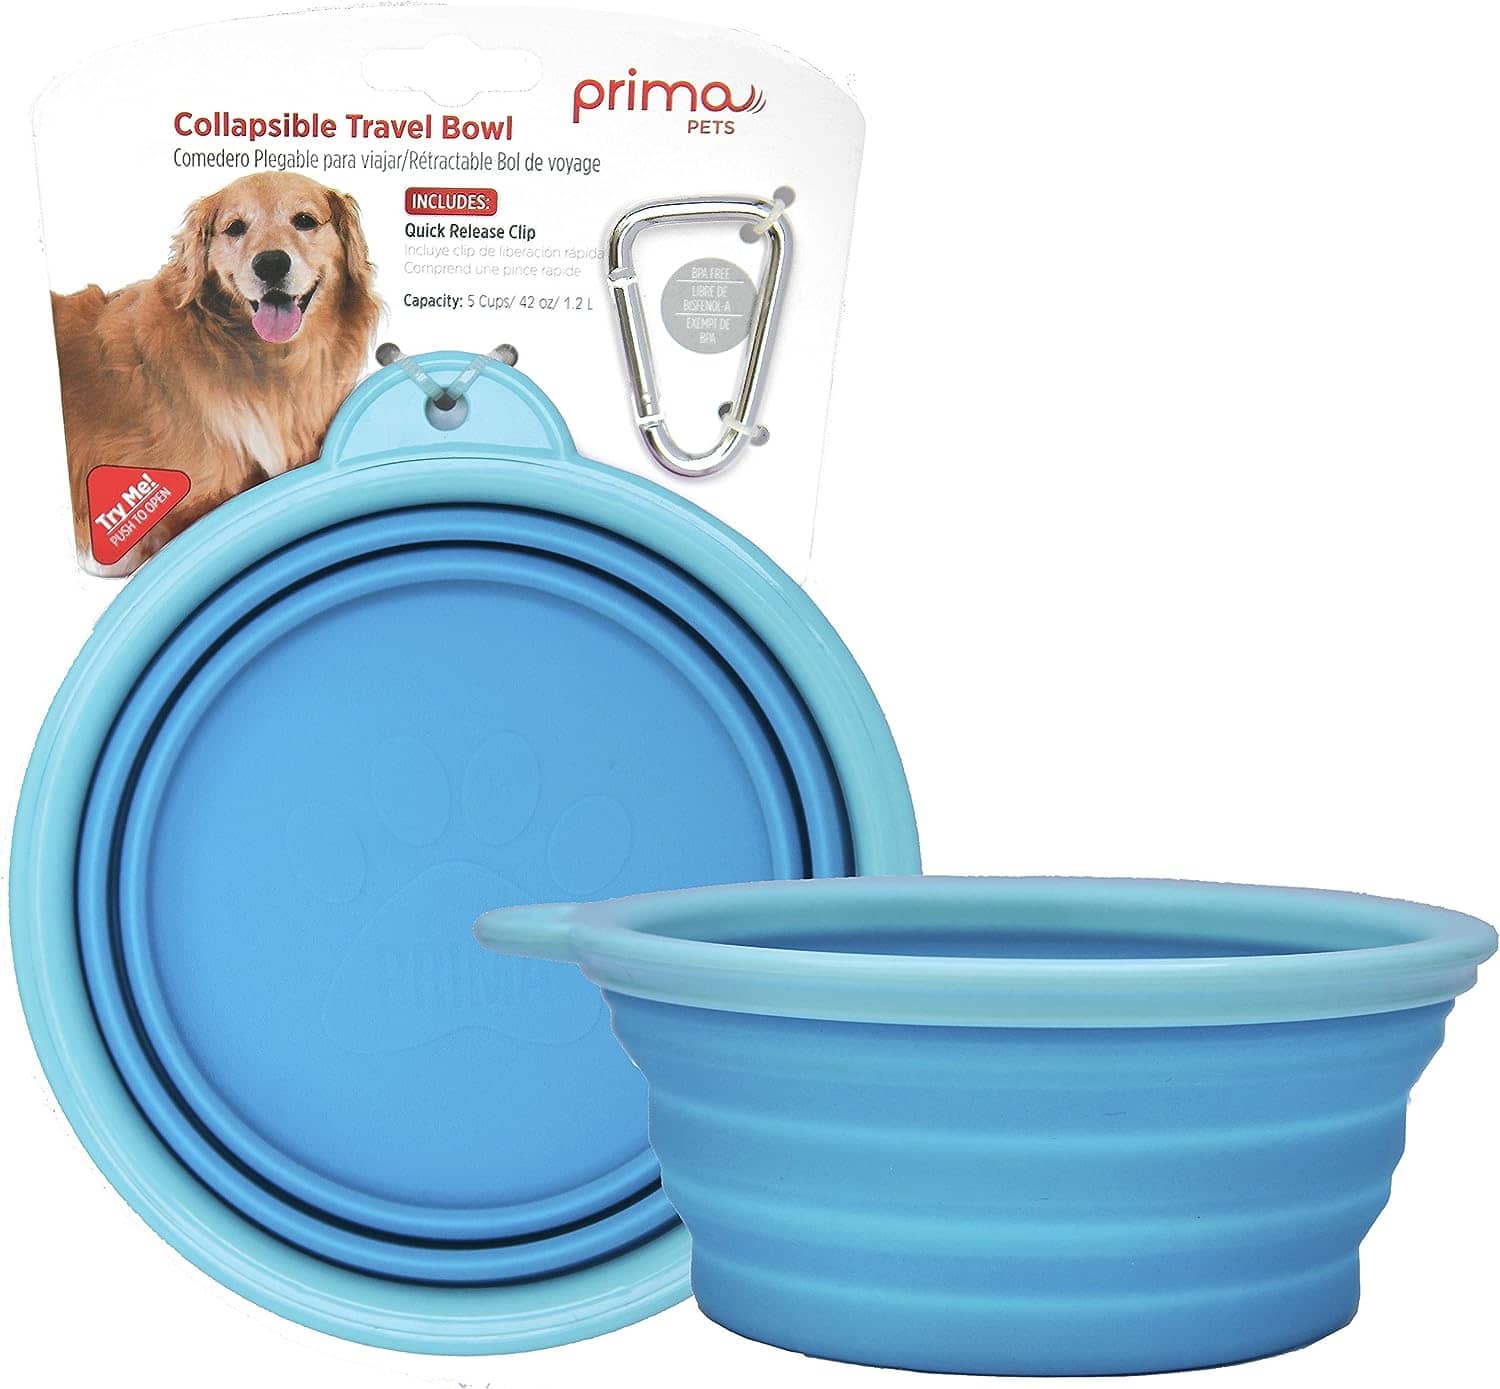 Prima Pets Collapsible Travel Bowl with Carabiner